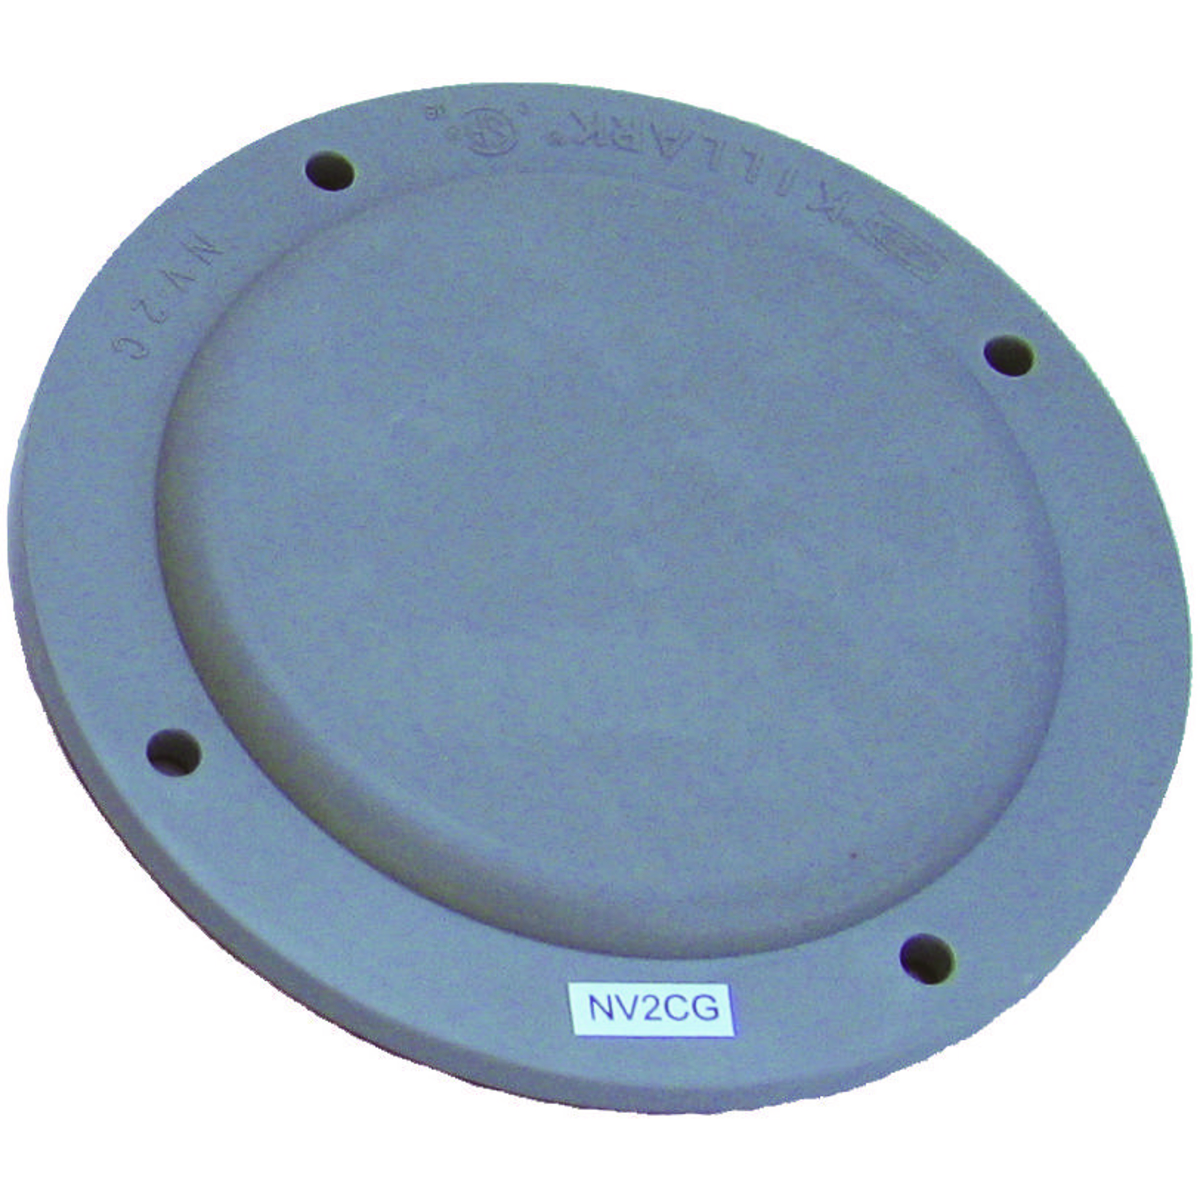 NV2 SERIES - GRAY NON-METALLIC BLANK COVER FOR NV2XG CEILING BOXES -INCLUDES EXTRA GASKET